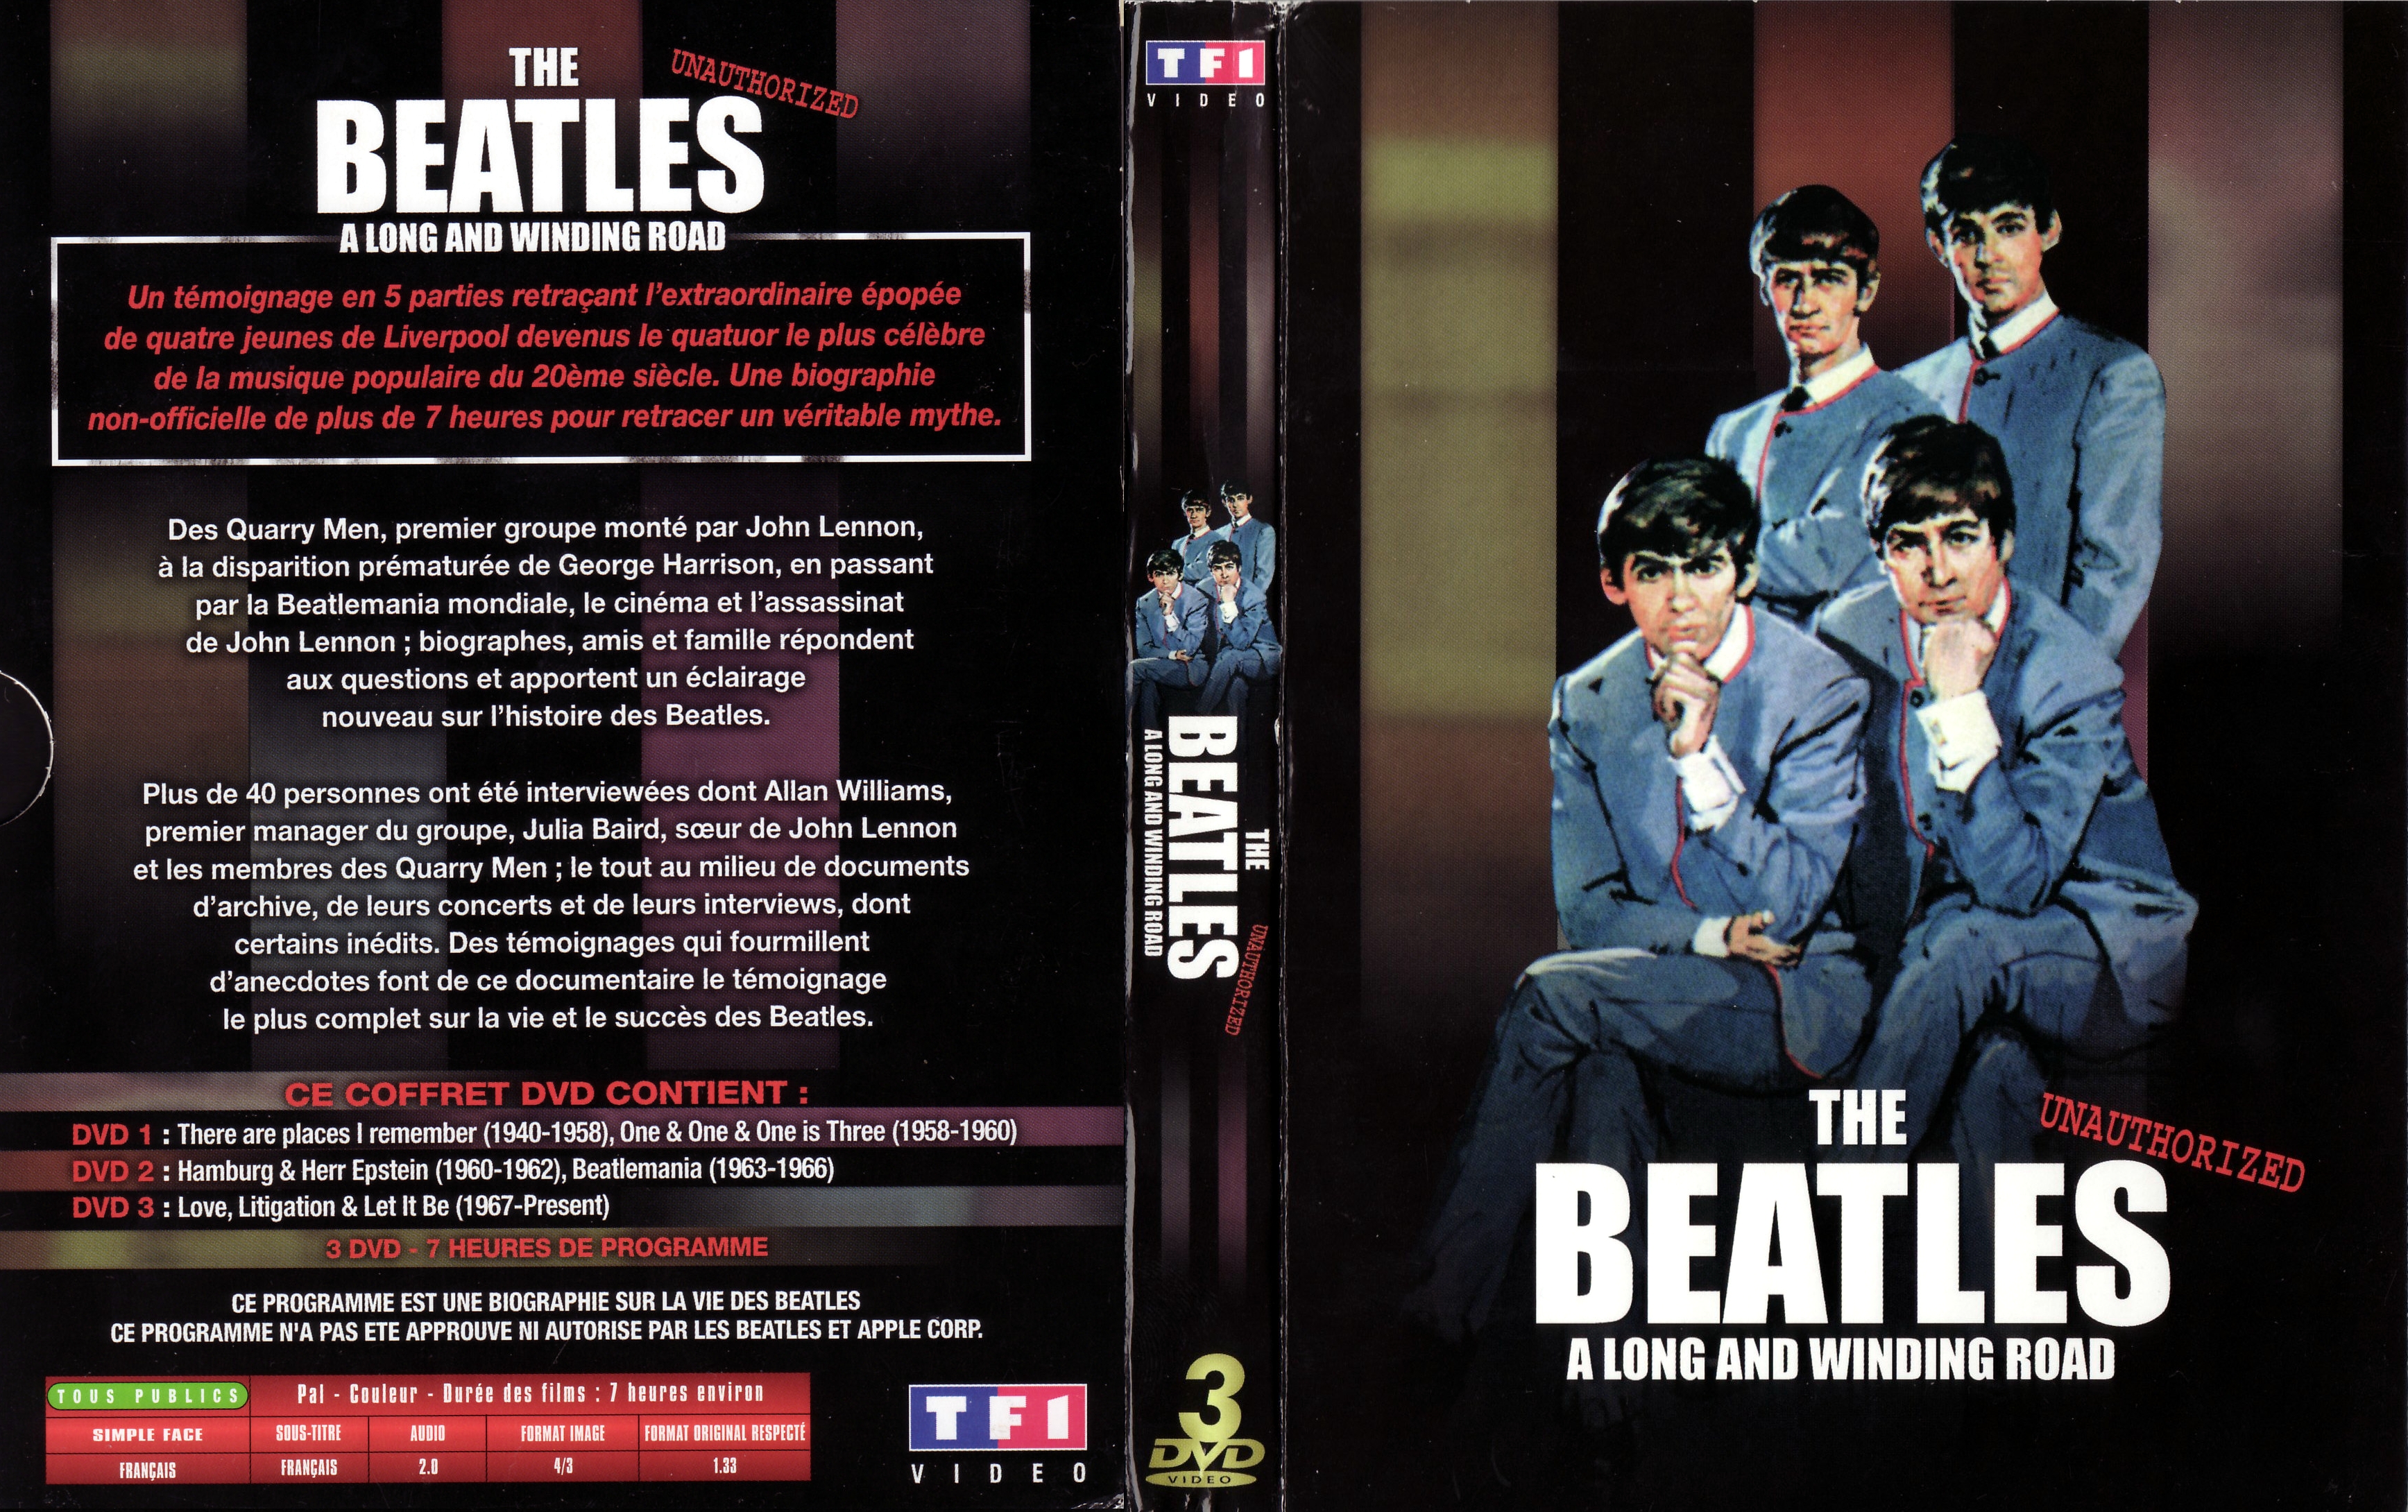 Jaquette DVD The beatles a long and winding road v2